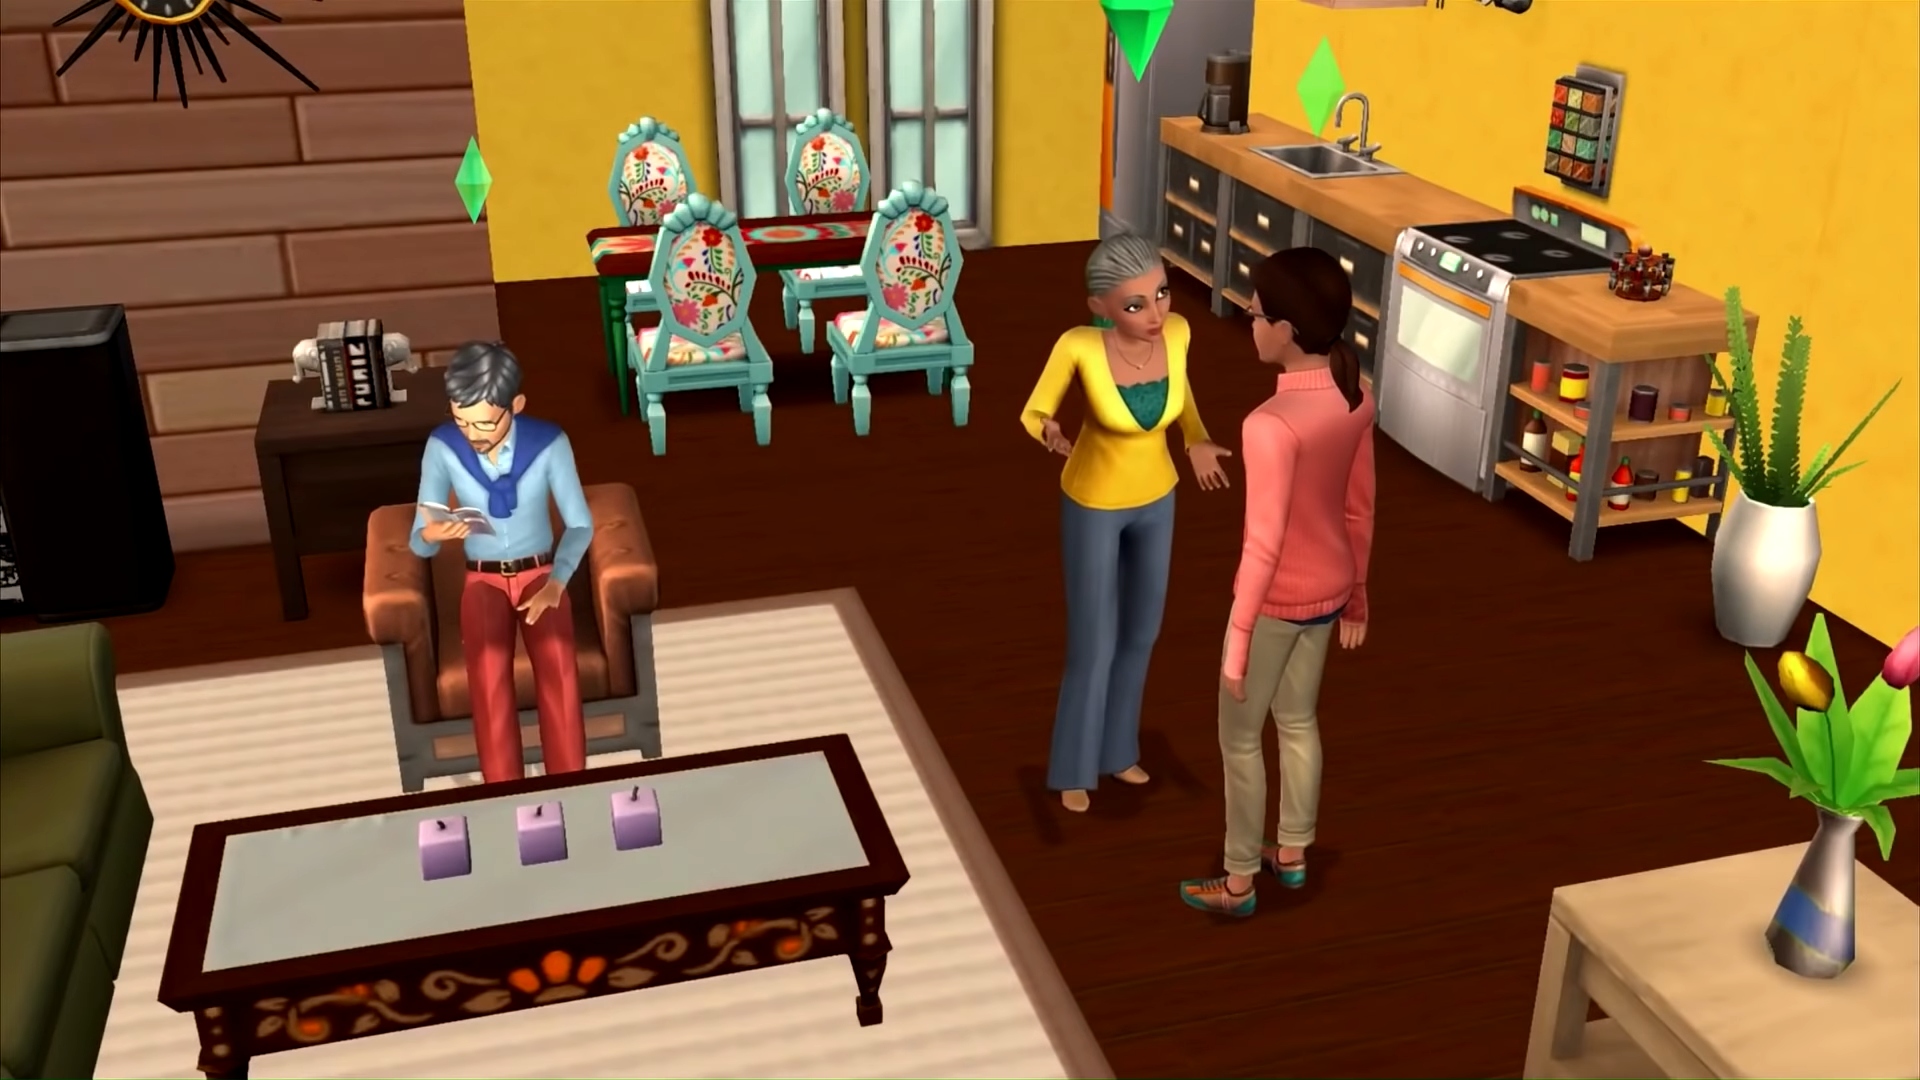 Best PC games on mobile: The Sims Mobile. A screenshot shows a group of three Sims hanging out in a house. One is sitting two are standing.